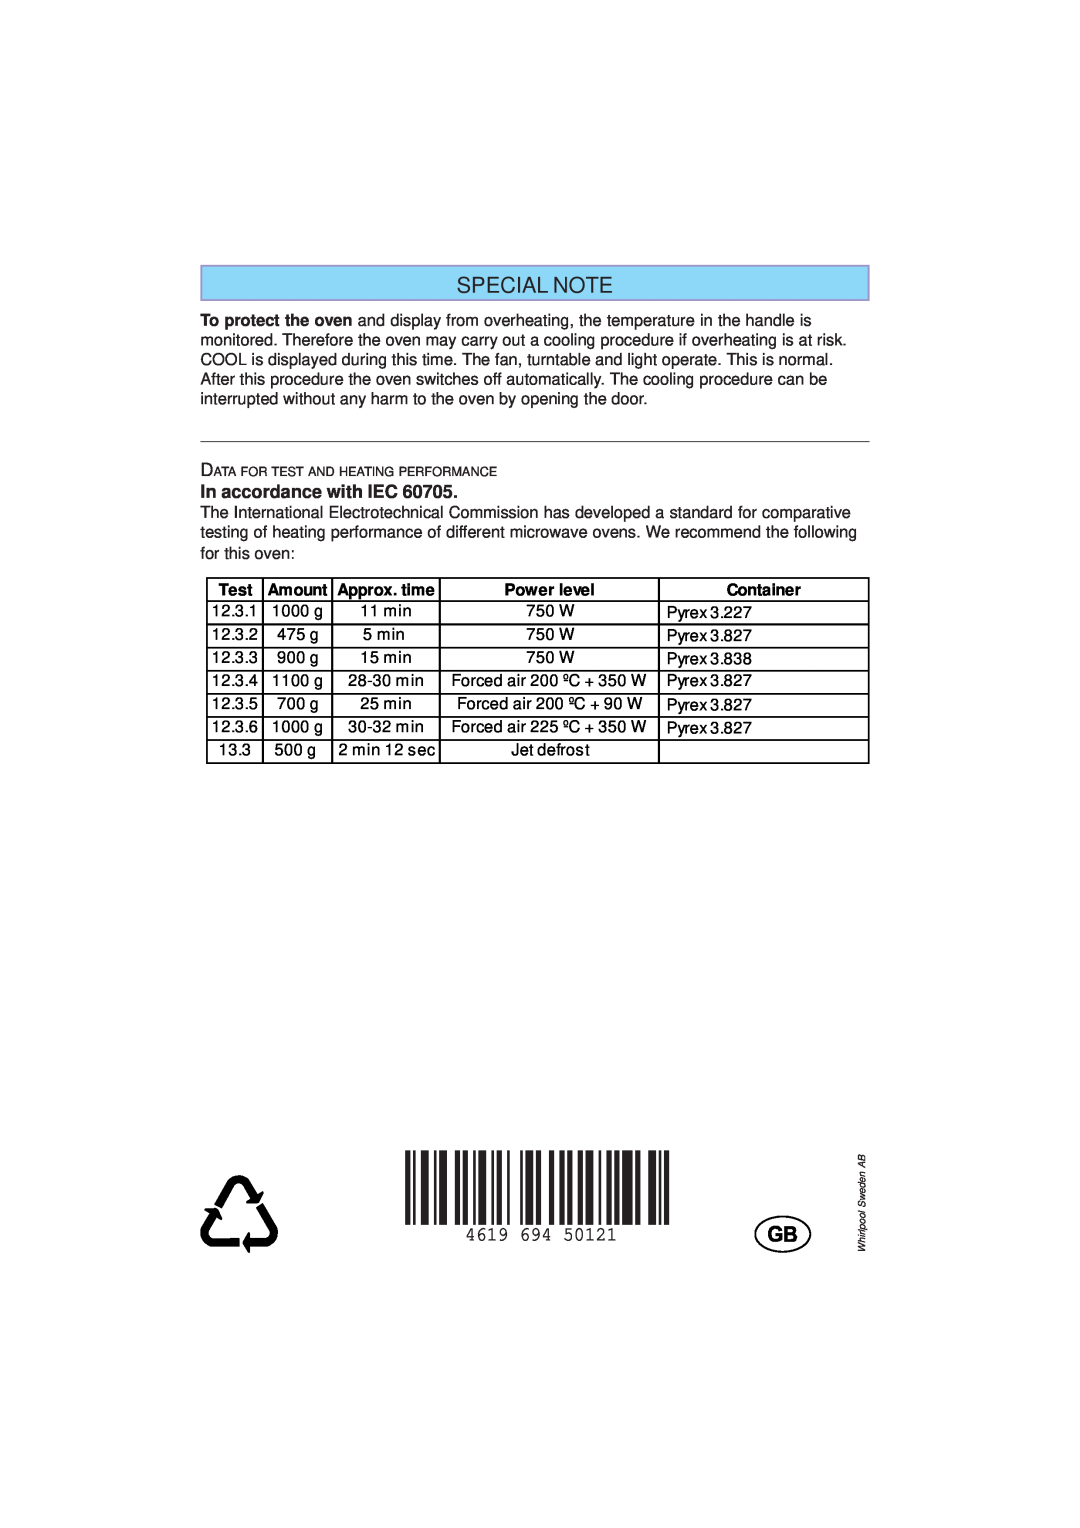 Whirlpool JT 359 manual Special Note, Test, Amount, Approx. time, Power level, Container, 4619, In accordance with IEC 